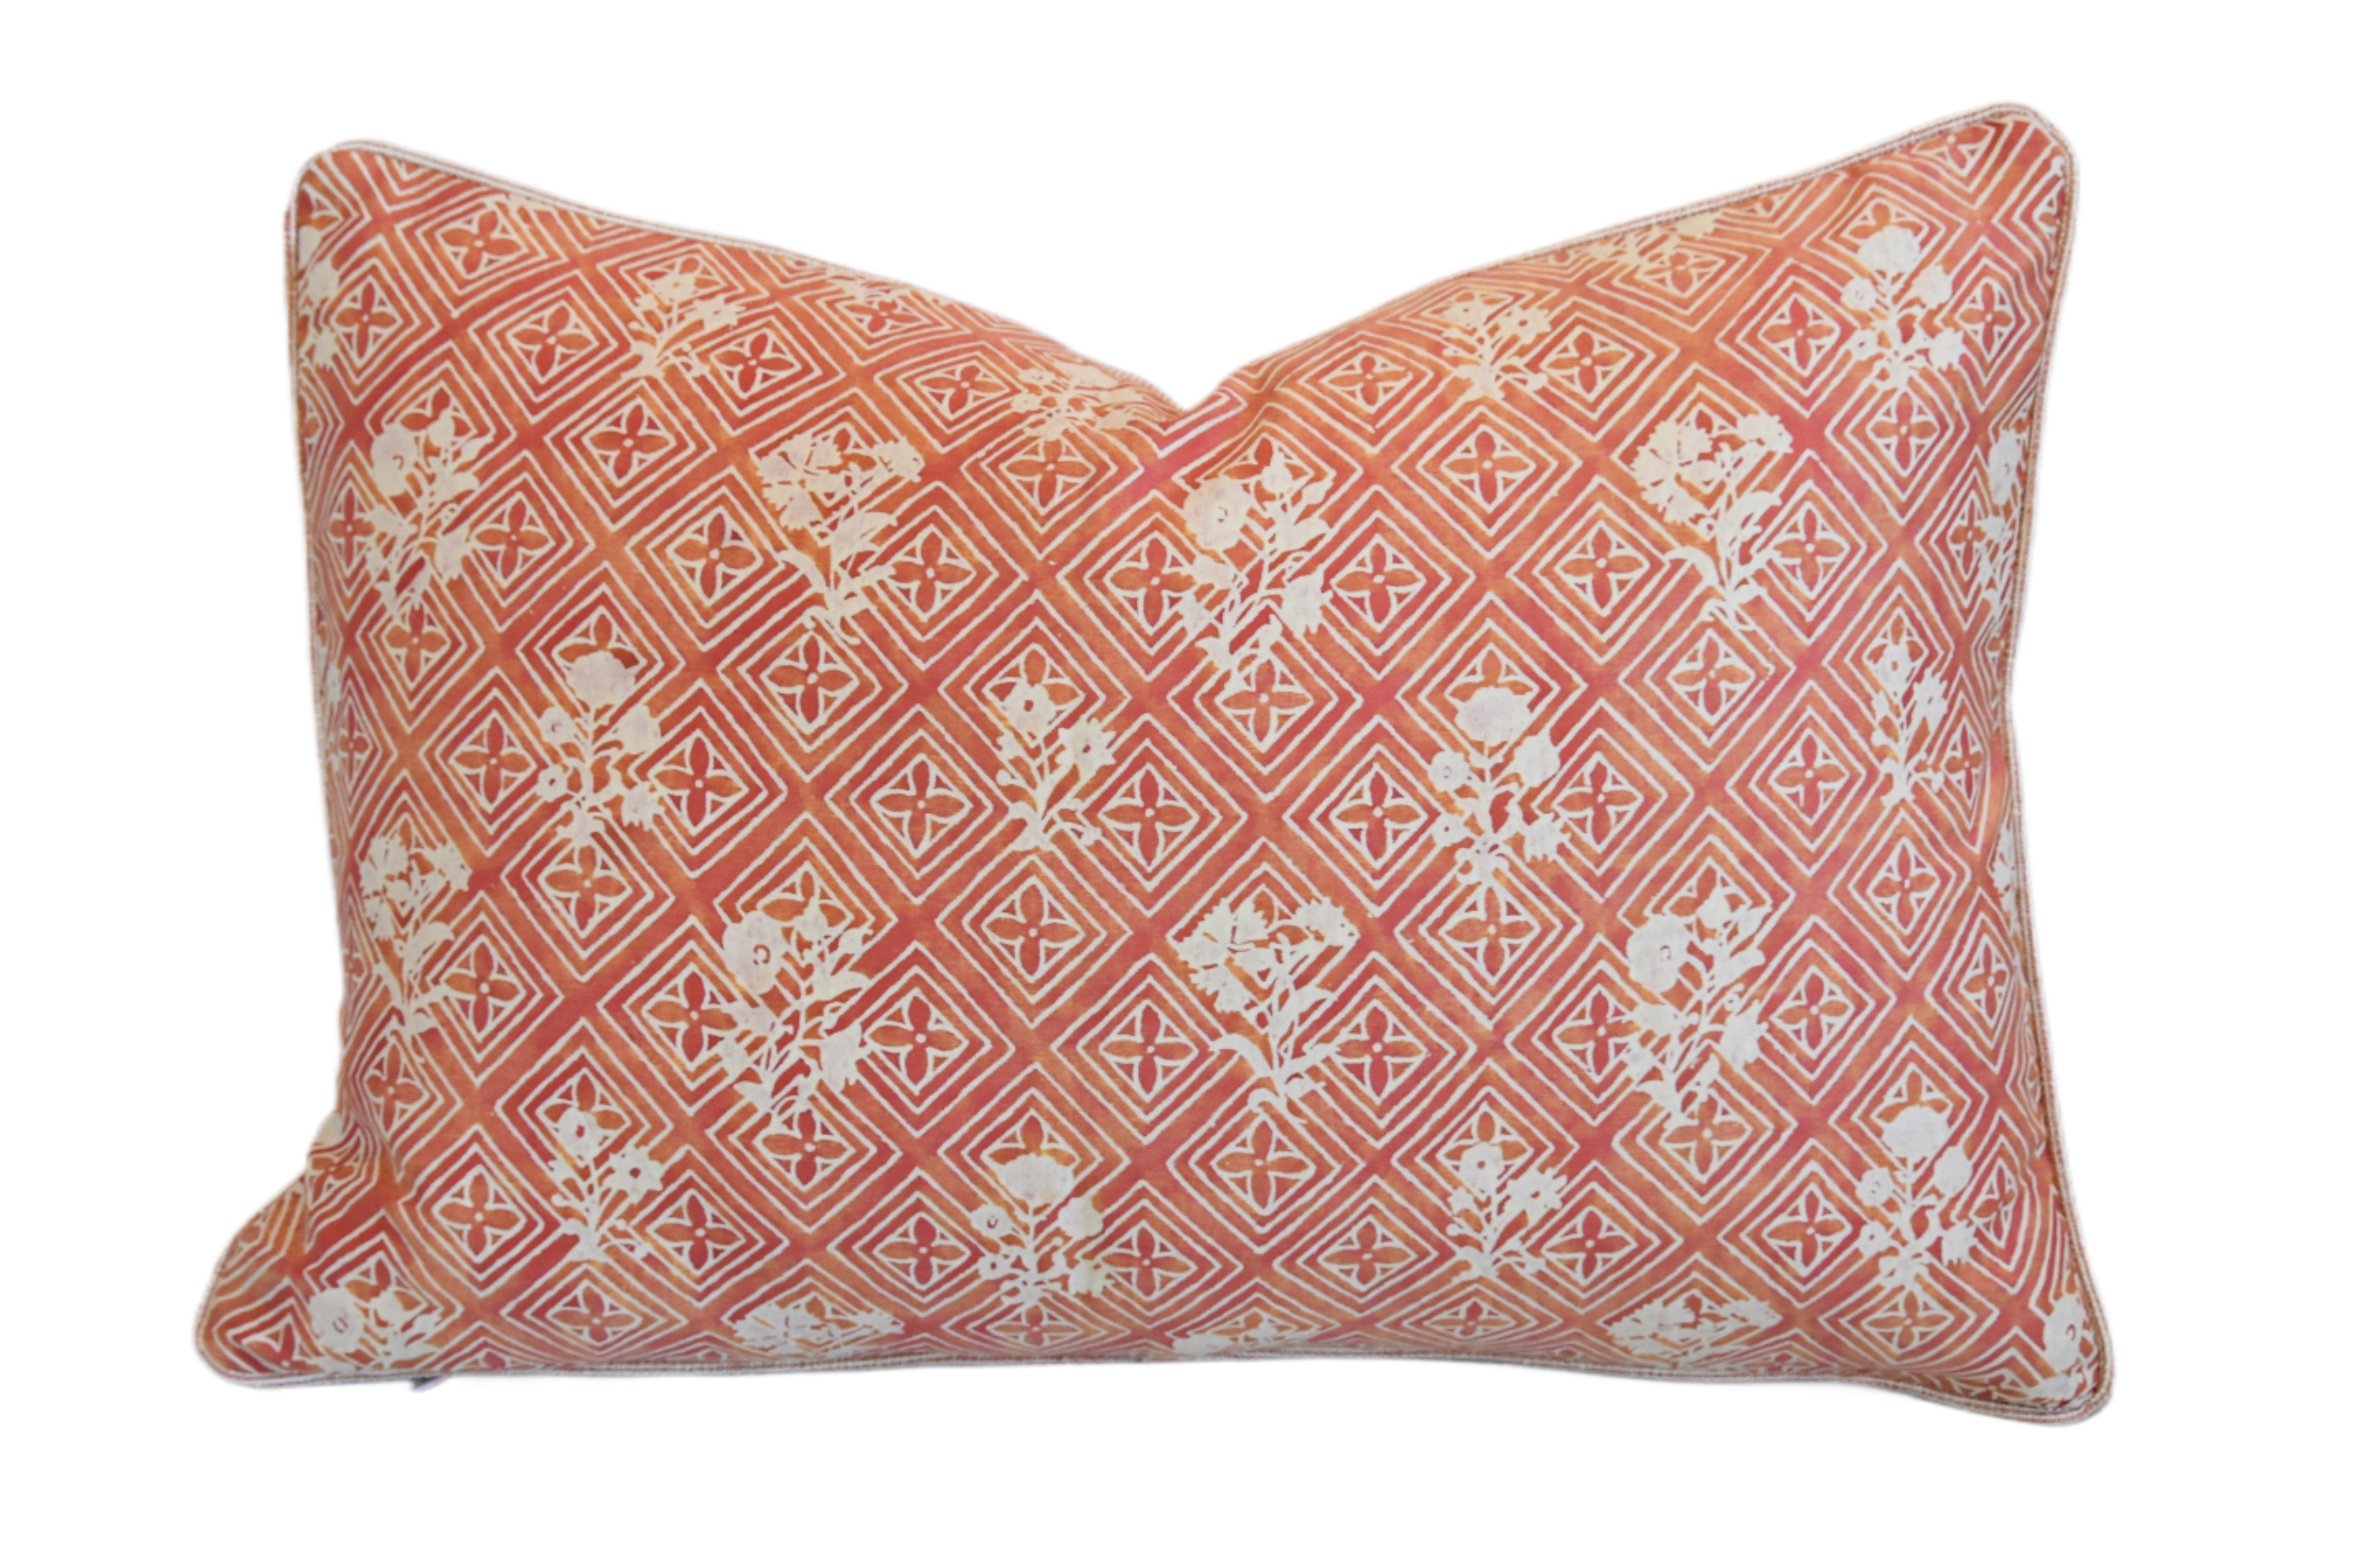 Mariano Fortuny Jupon Bouquet Pillow~P77694831